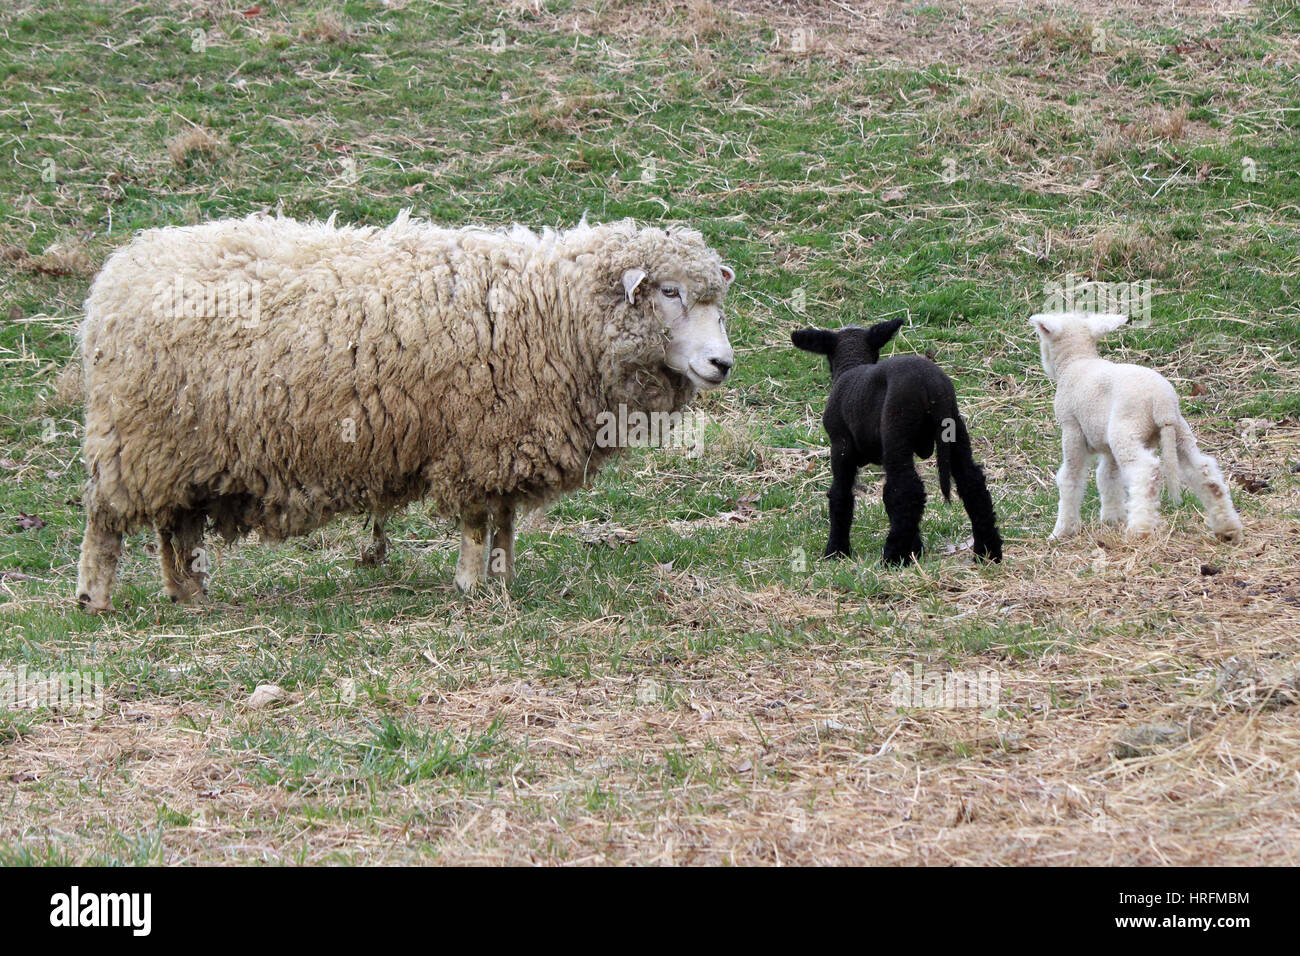 A mother sheep in a pasture with her twin lambs.  One is black and one is white. Stock Photo